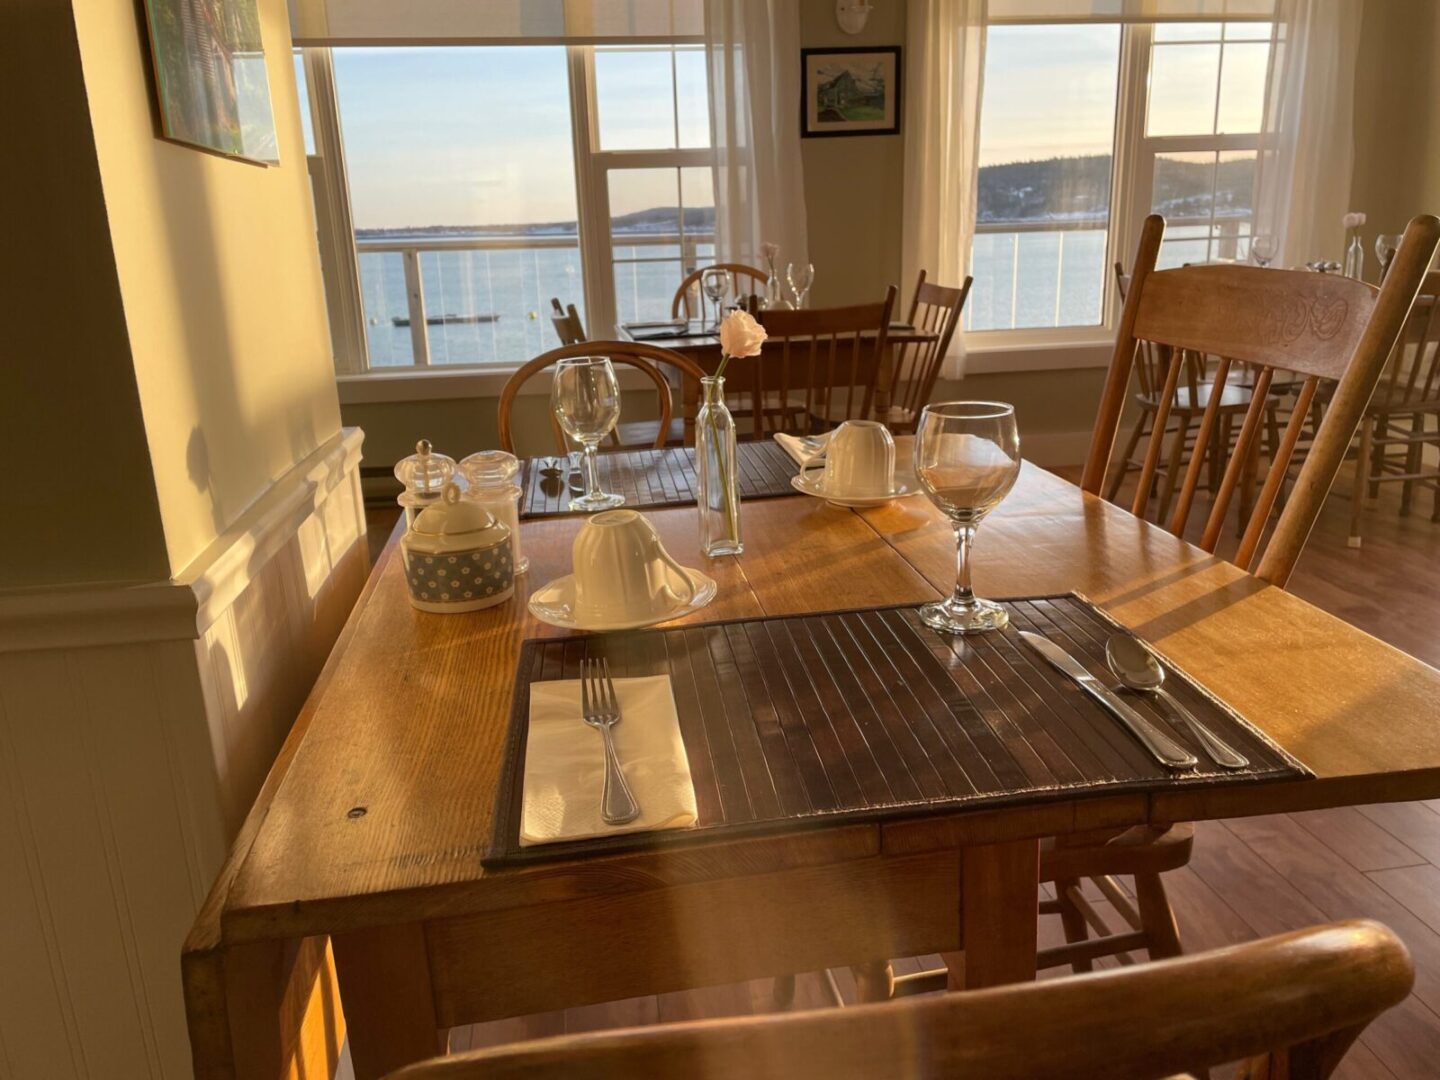 A dining room table with a view of the ocean.